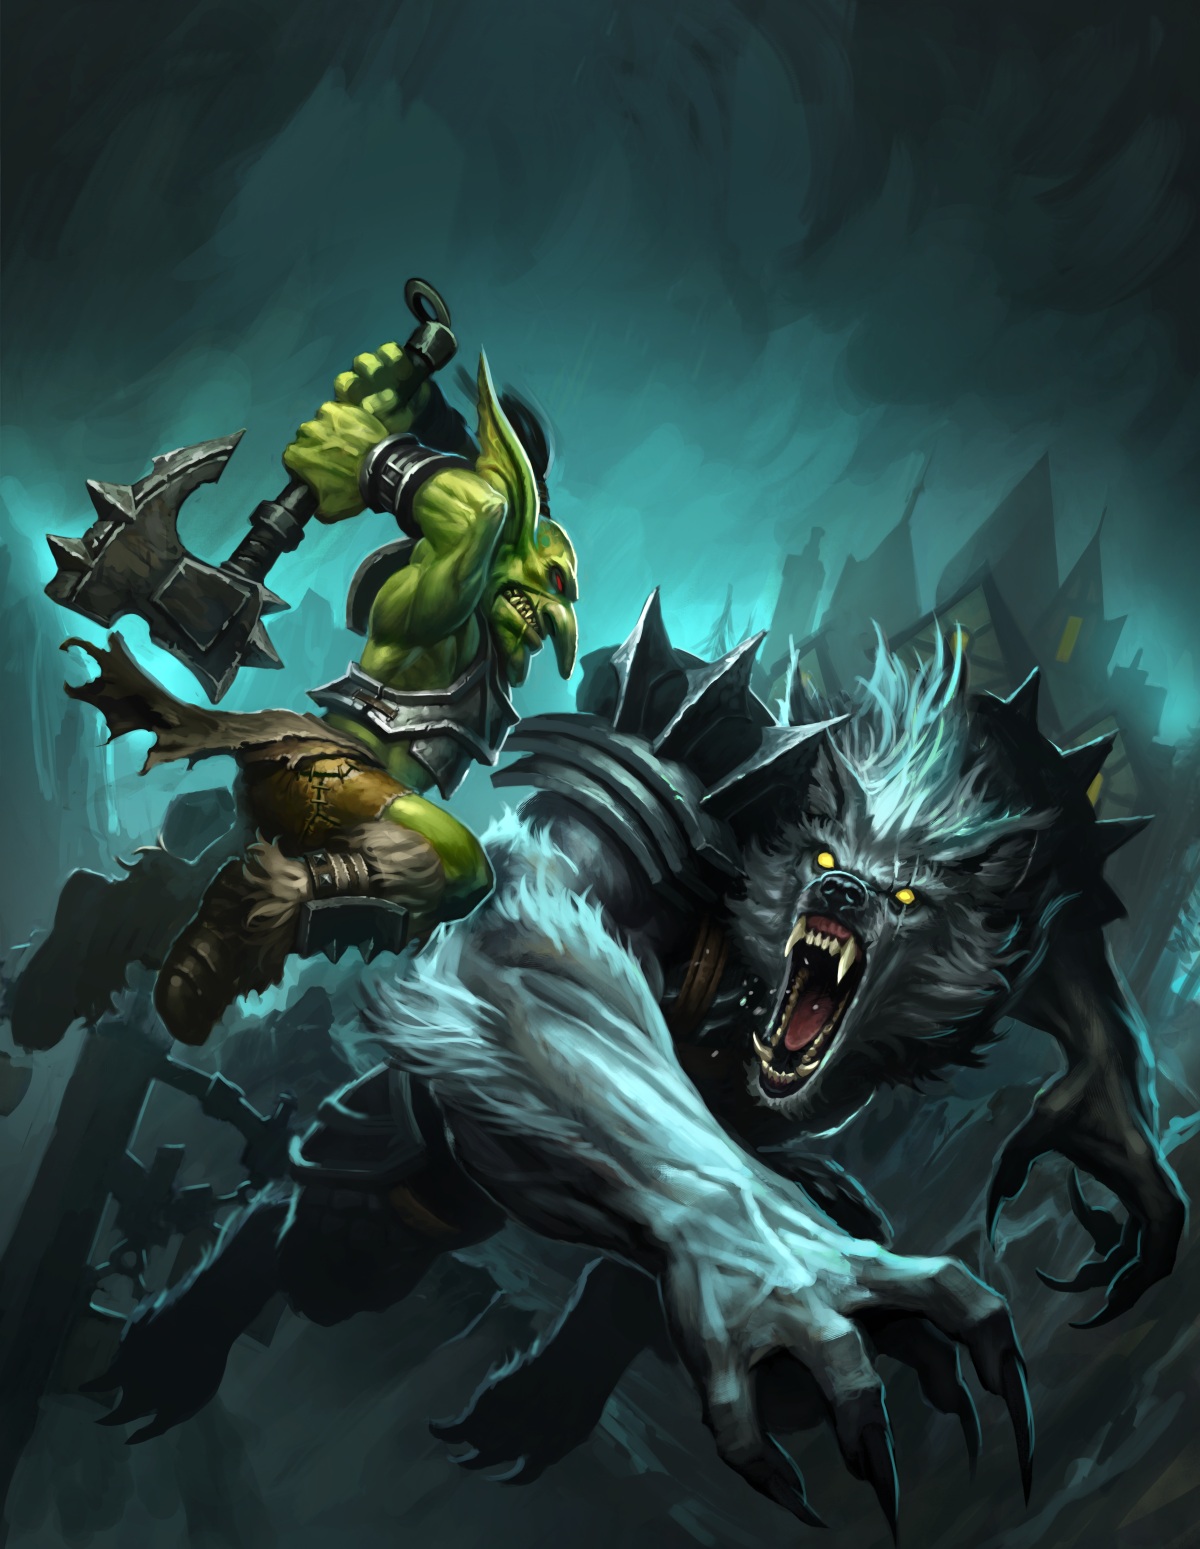 Worgen Vs Goblin Dota Wallpaper Here You Can See